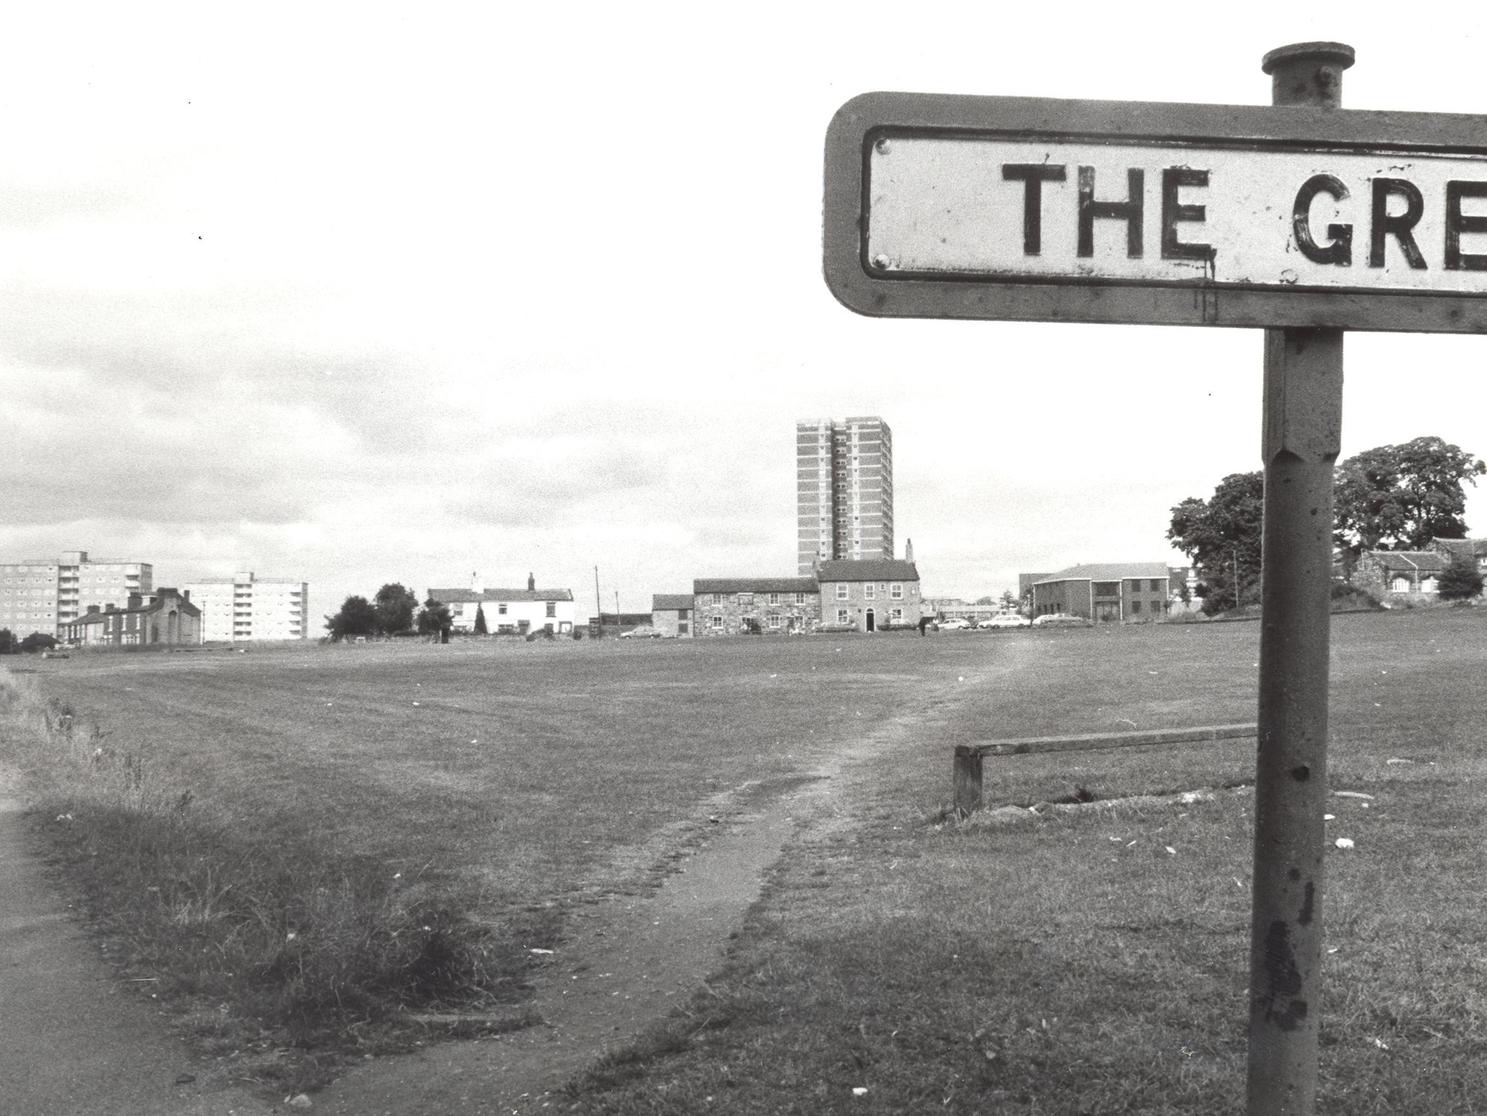 Another view of Seacroft in the early 1980s.